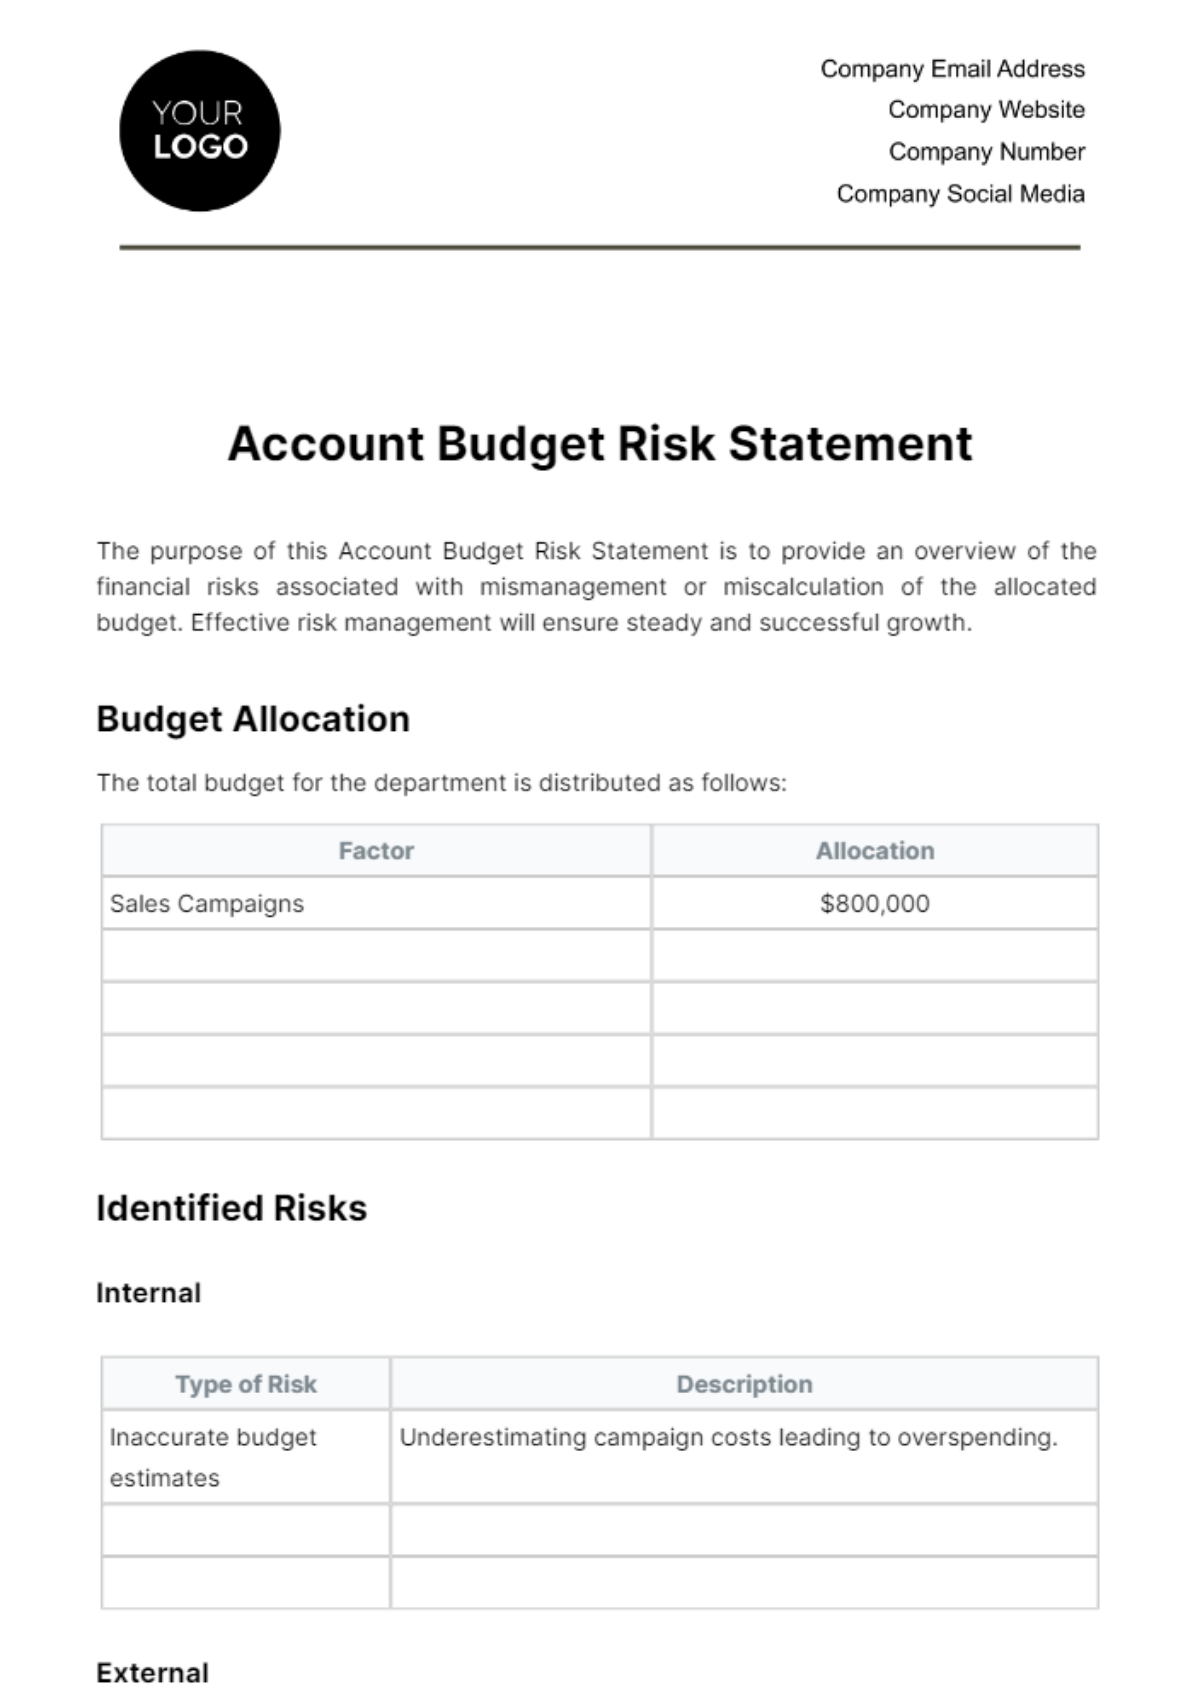 Account Budget Risk Statement Template